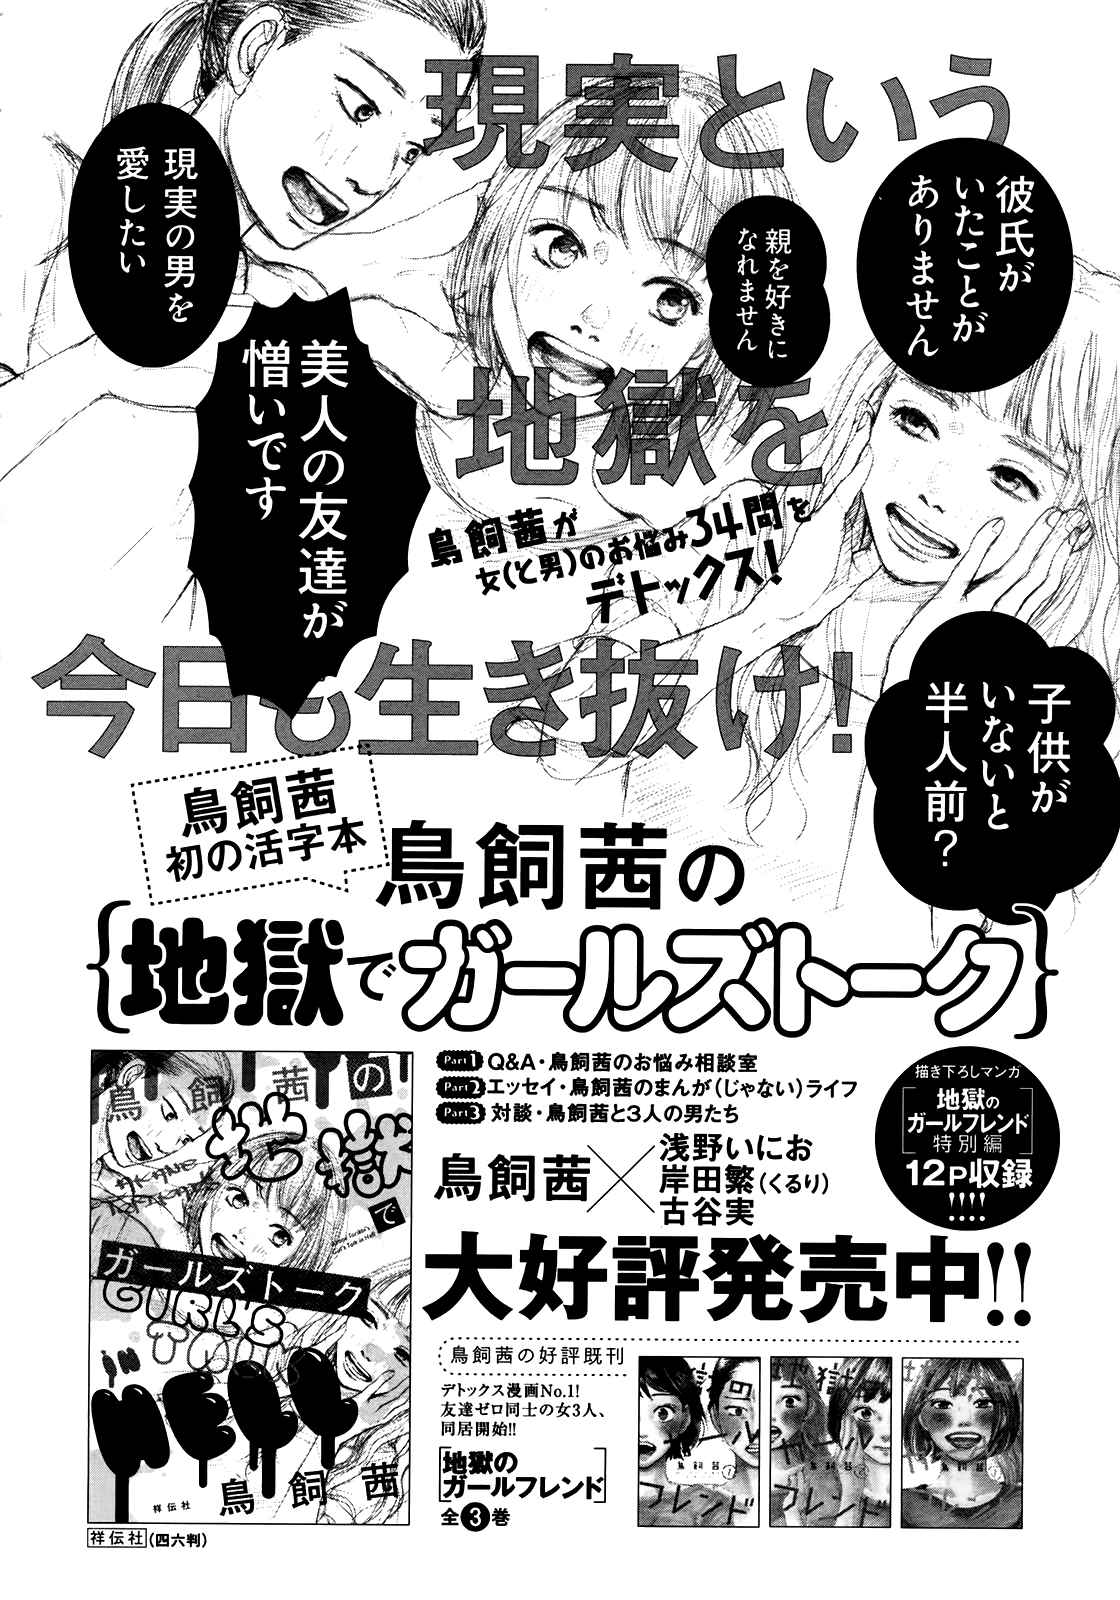 Sensei no Shiroi Uso Vol. 8 Ch. 49 With You From the Beginning